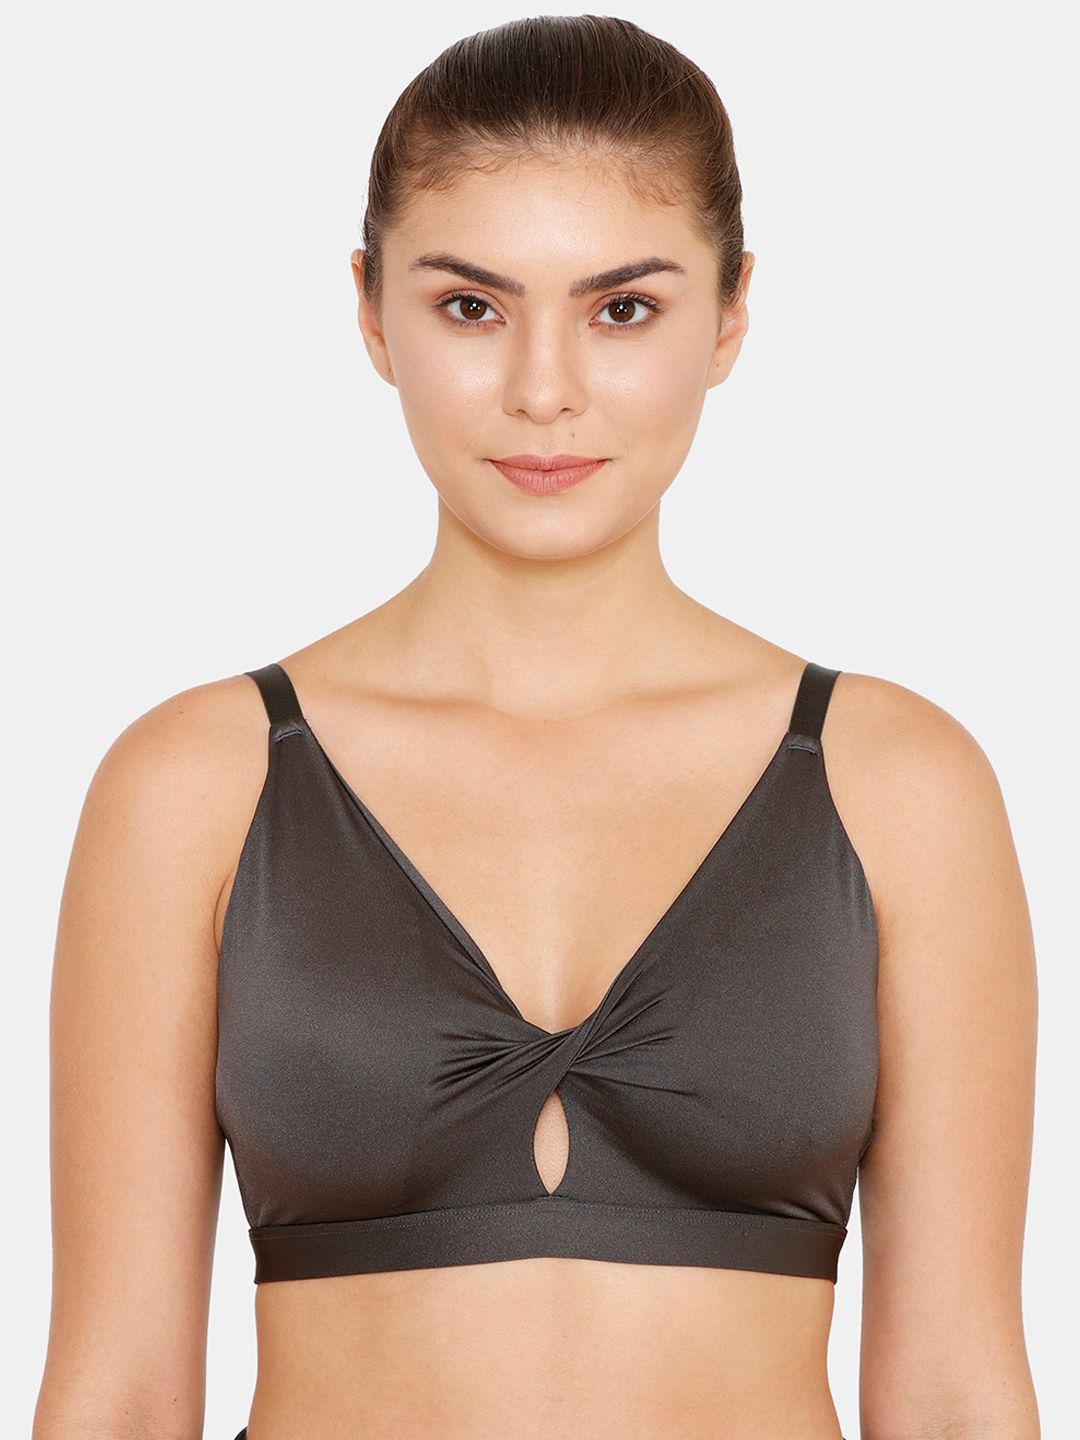 Zelocity by Zivame Charcoal Grey Solid Non-Wired Removable Padded Sports Bra ZC4429FASHAGREY Price in India